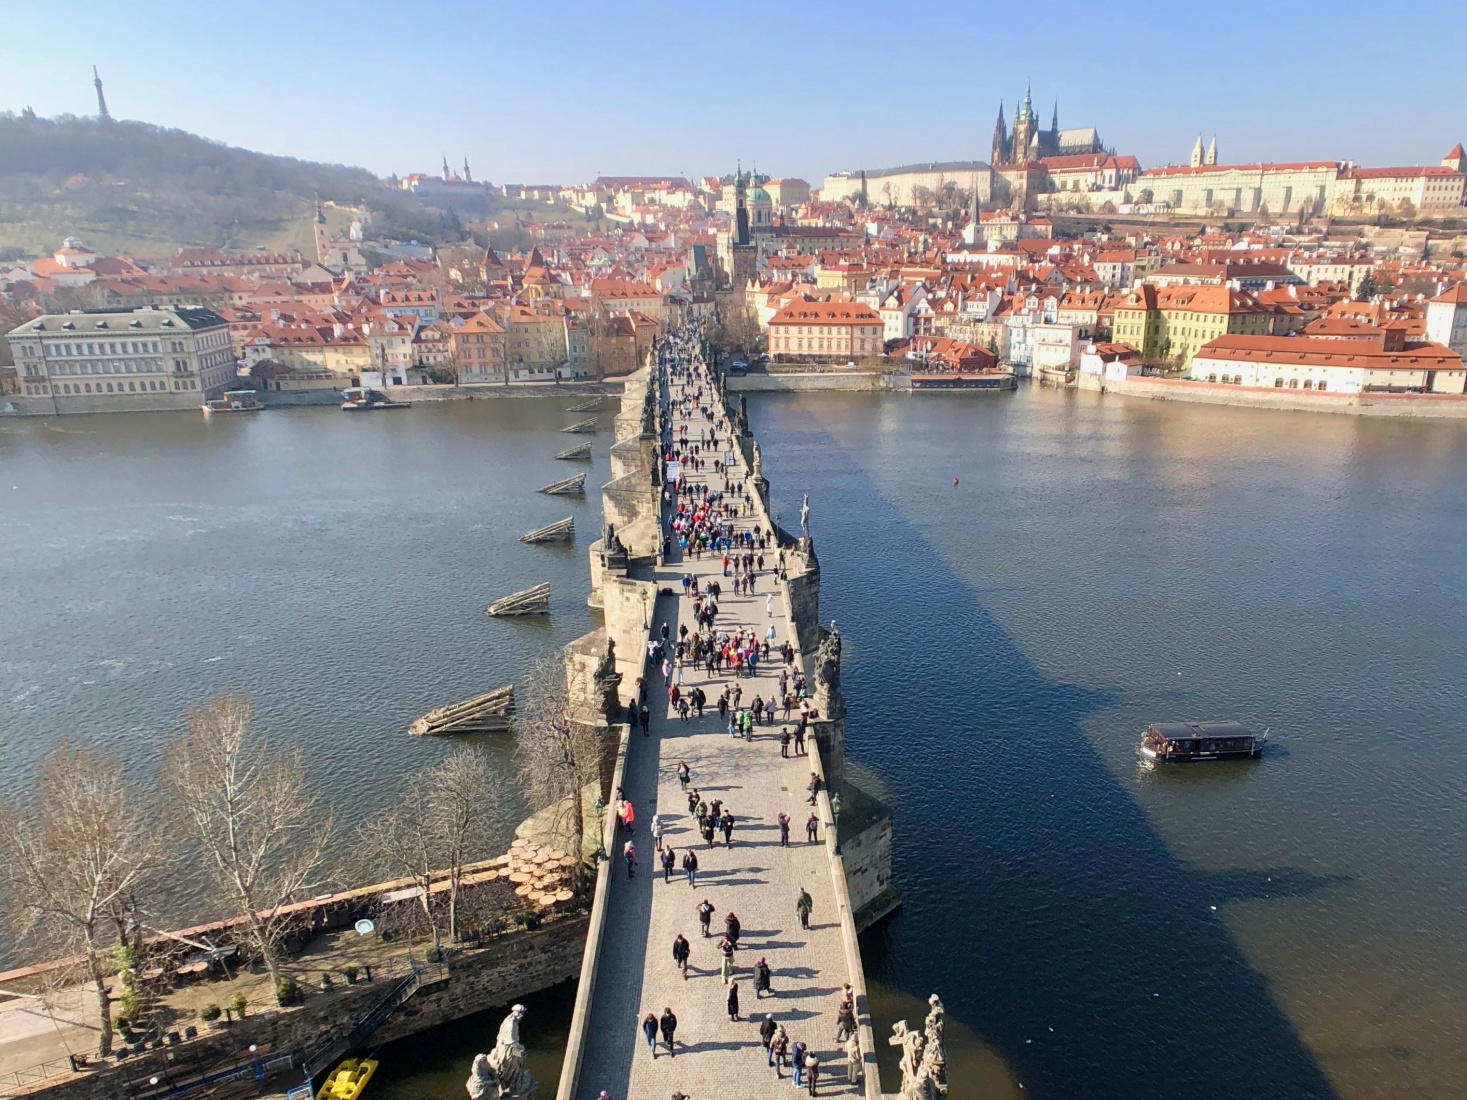 Prague's Charles Bridge from the Old Town Tower, showing off the Gothic bridge, Baroque statues, and varied architecture of Lesser Town.